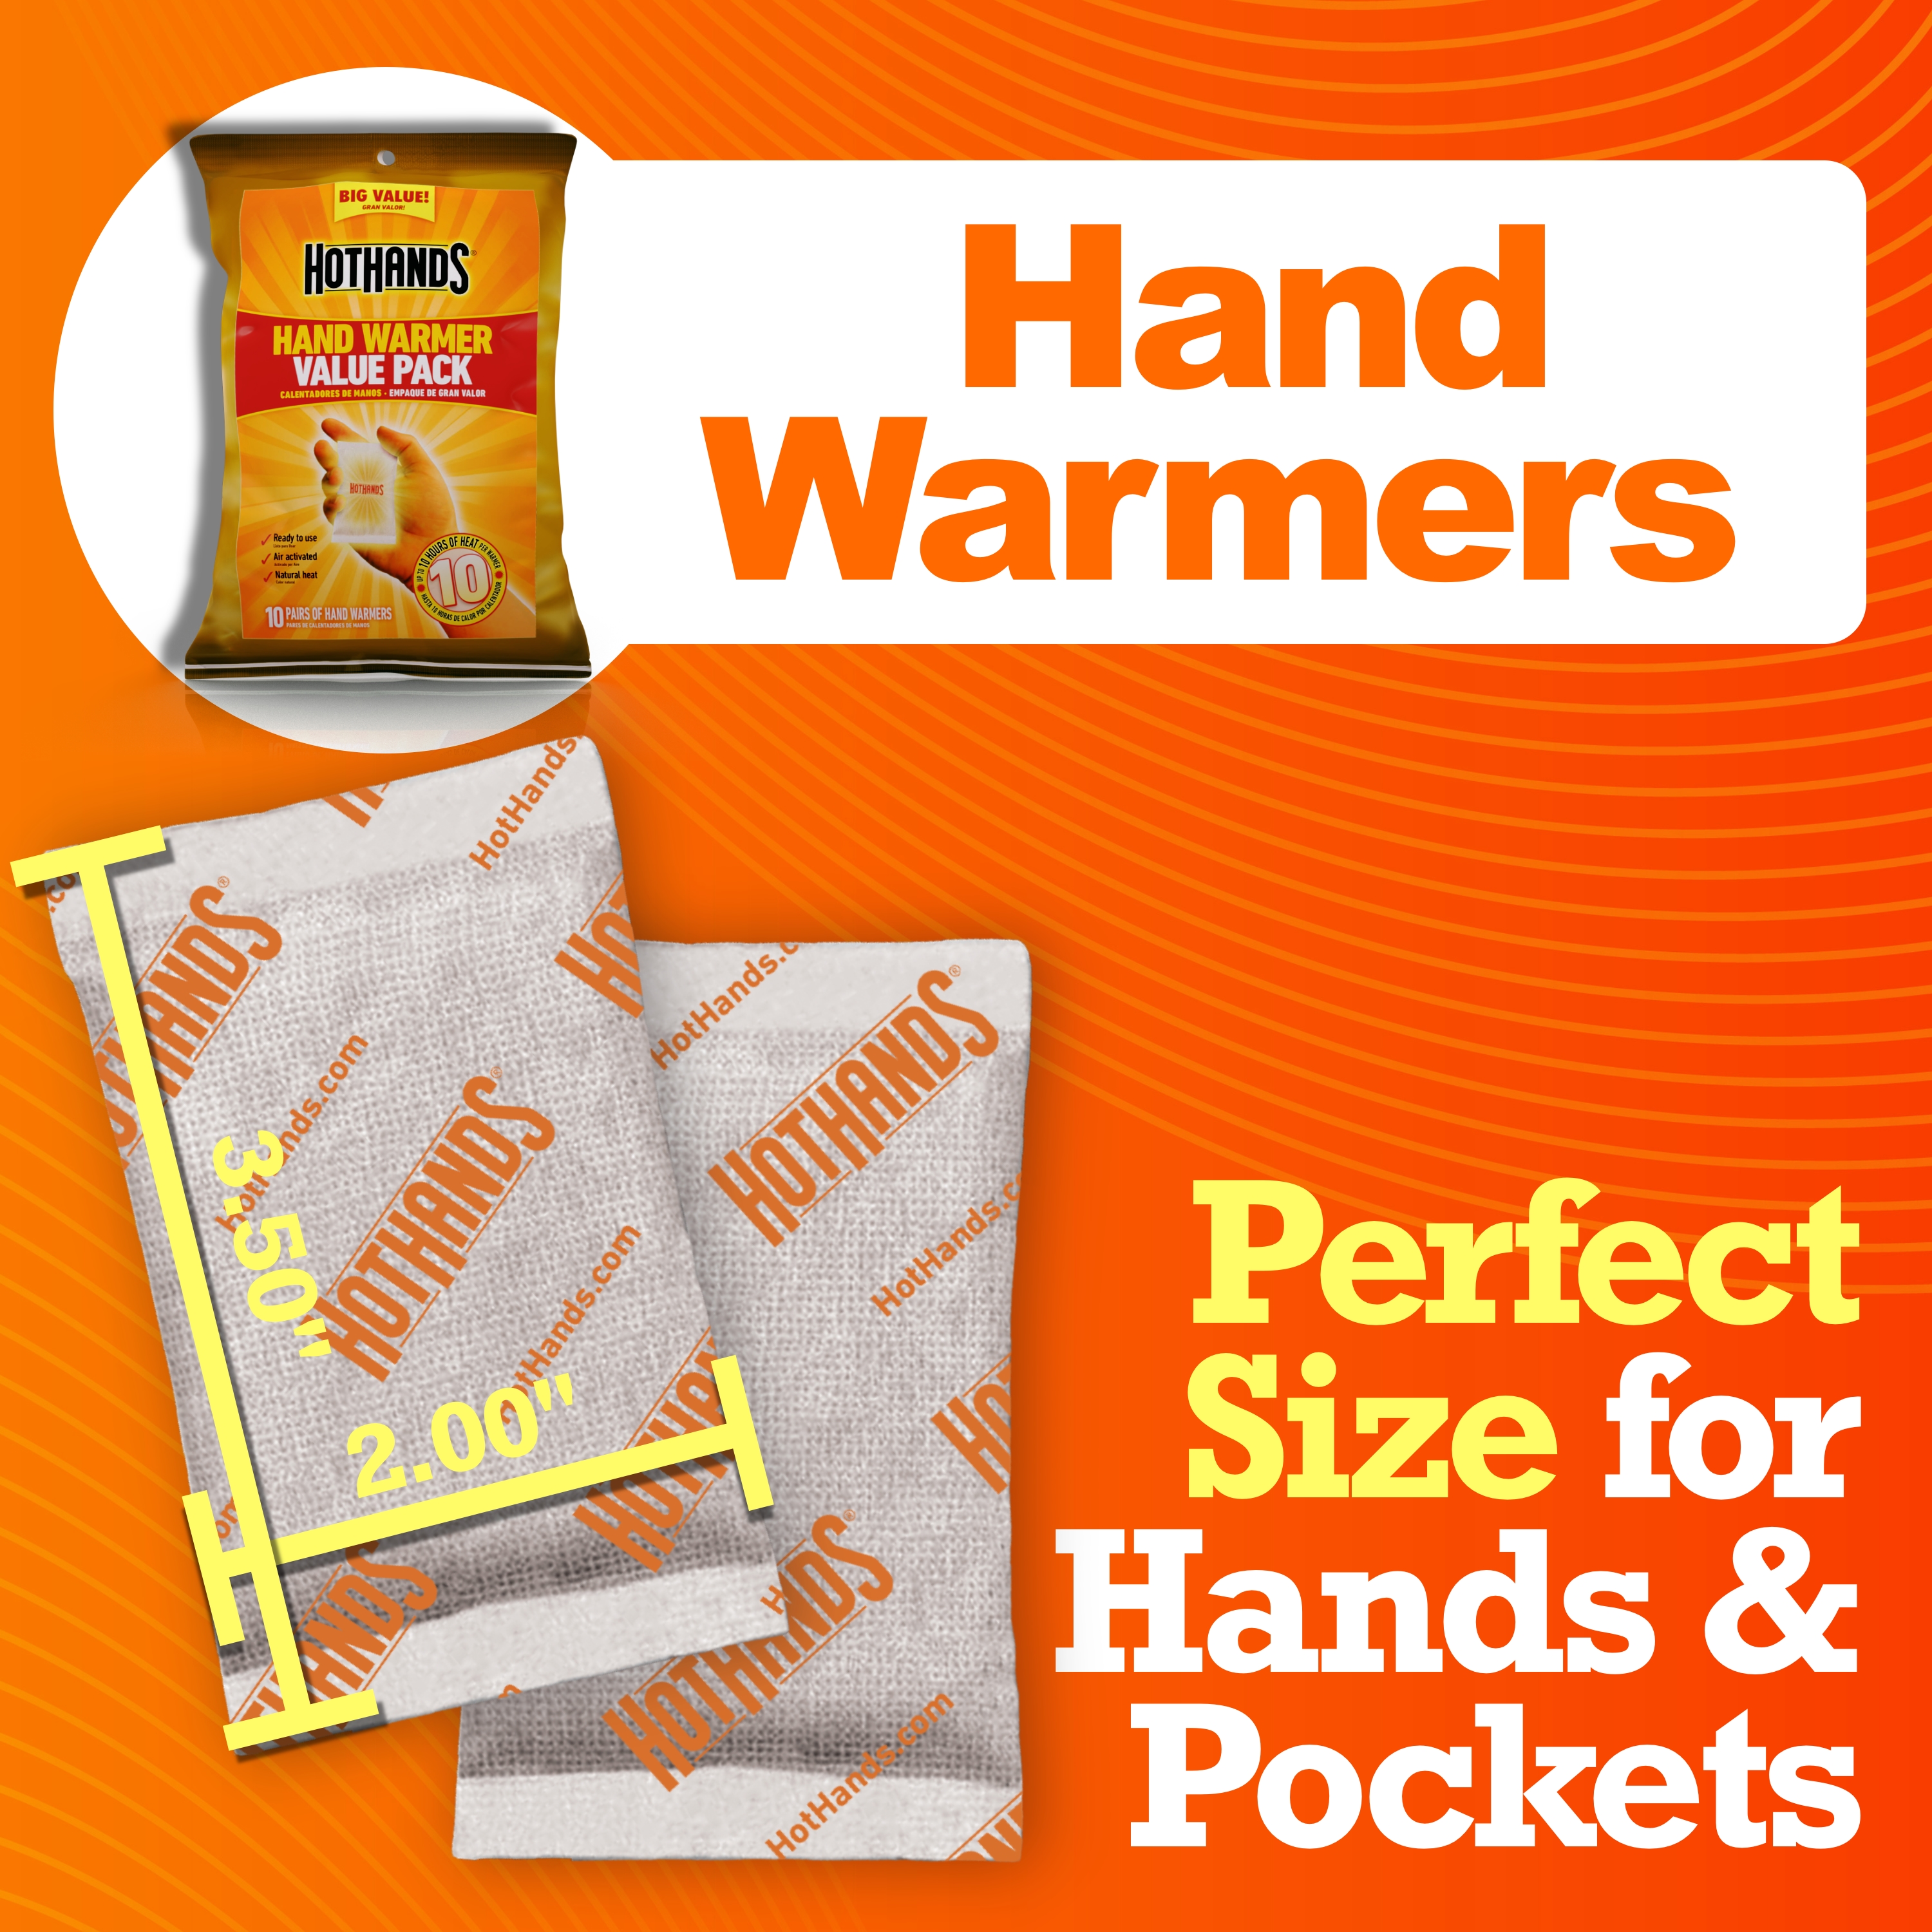 HotHands Hand Warmer 10-Pair Value Pack - image 3 of 6